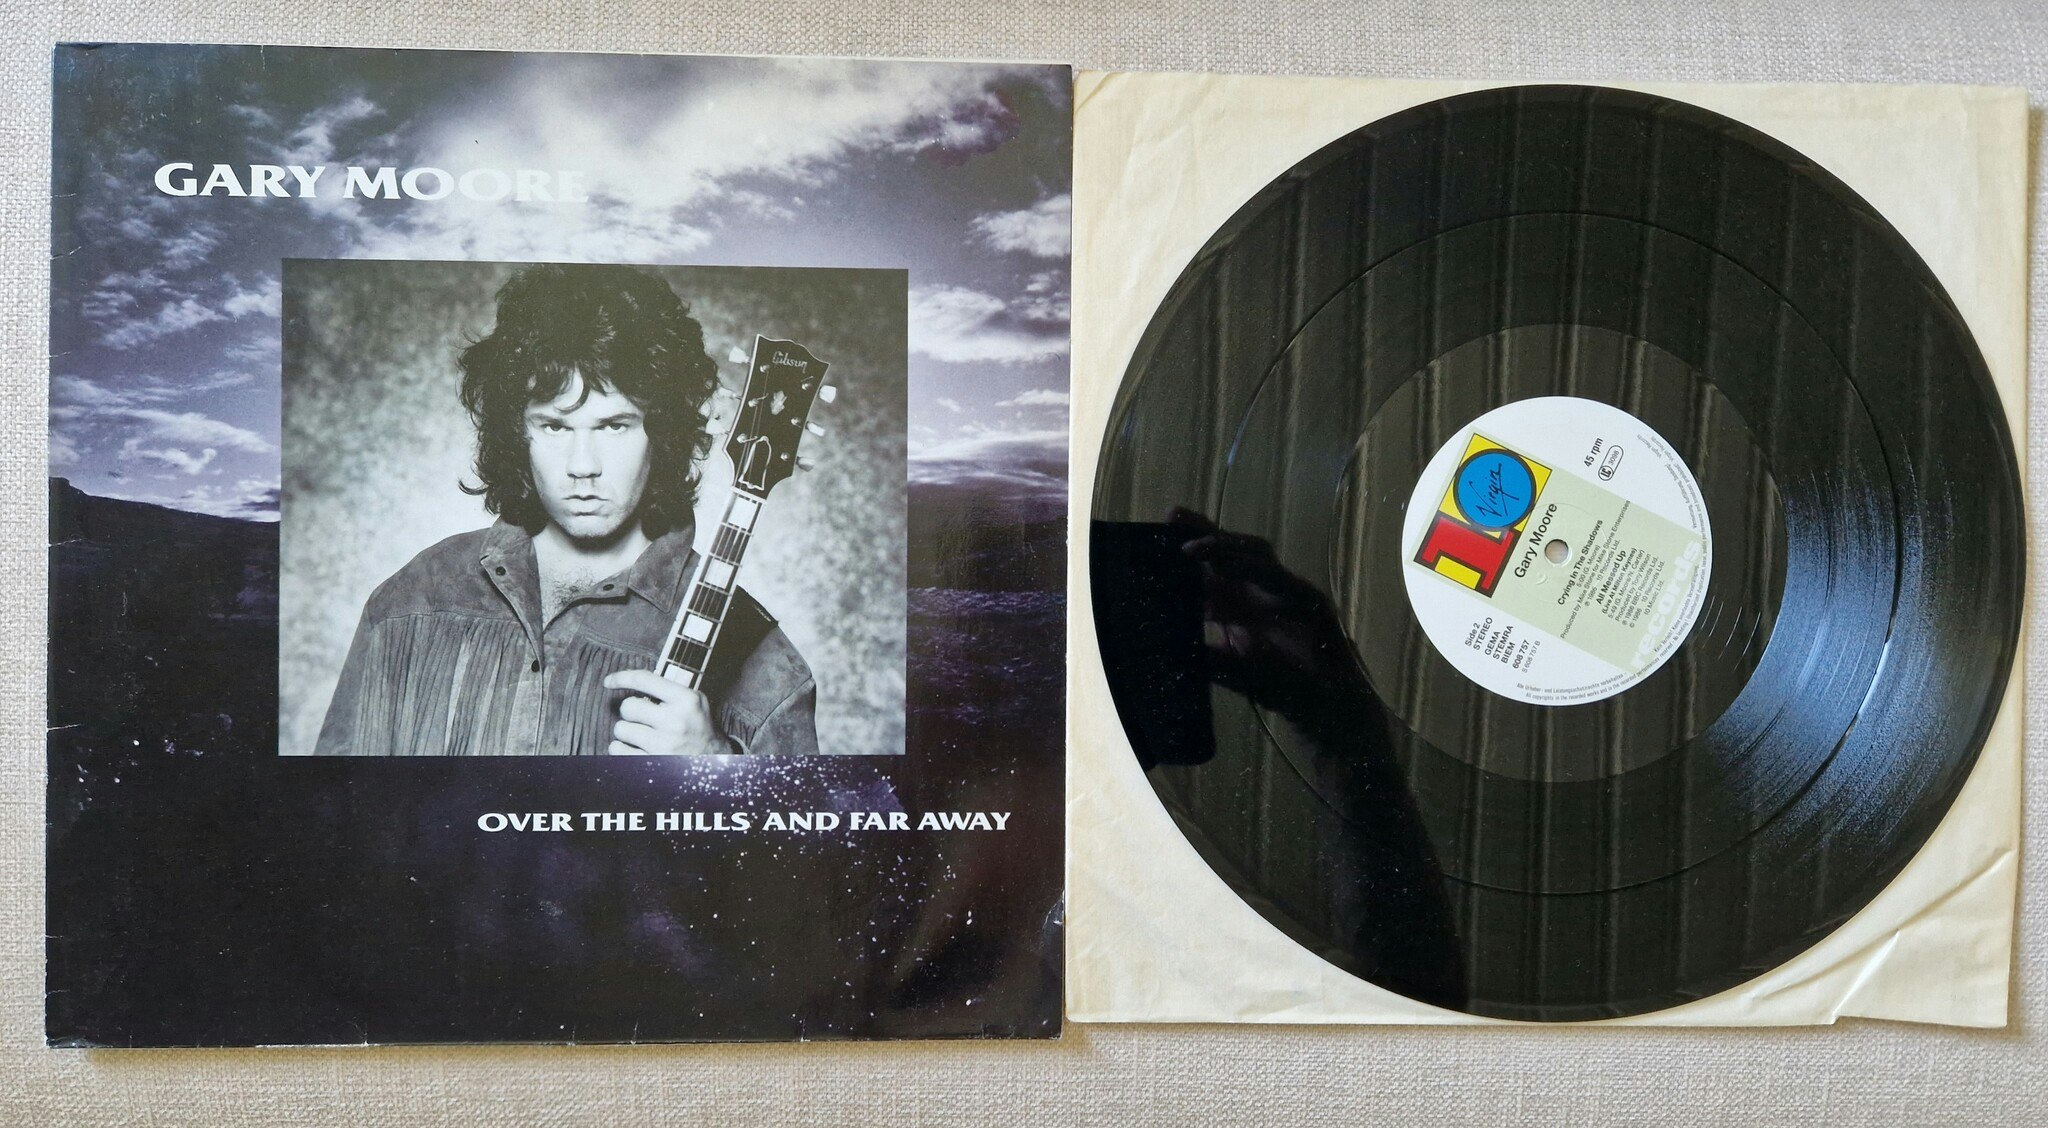 Gary Moore, Over the hills and far away. Vinyl S 12"